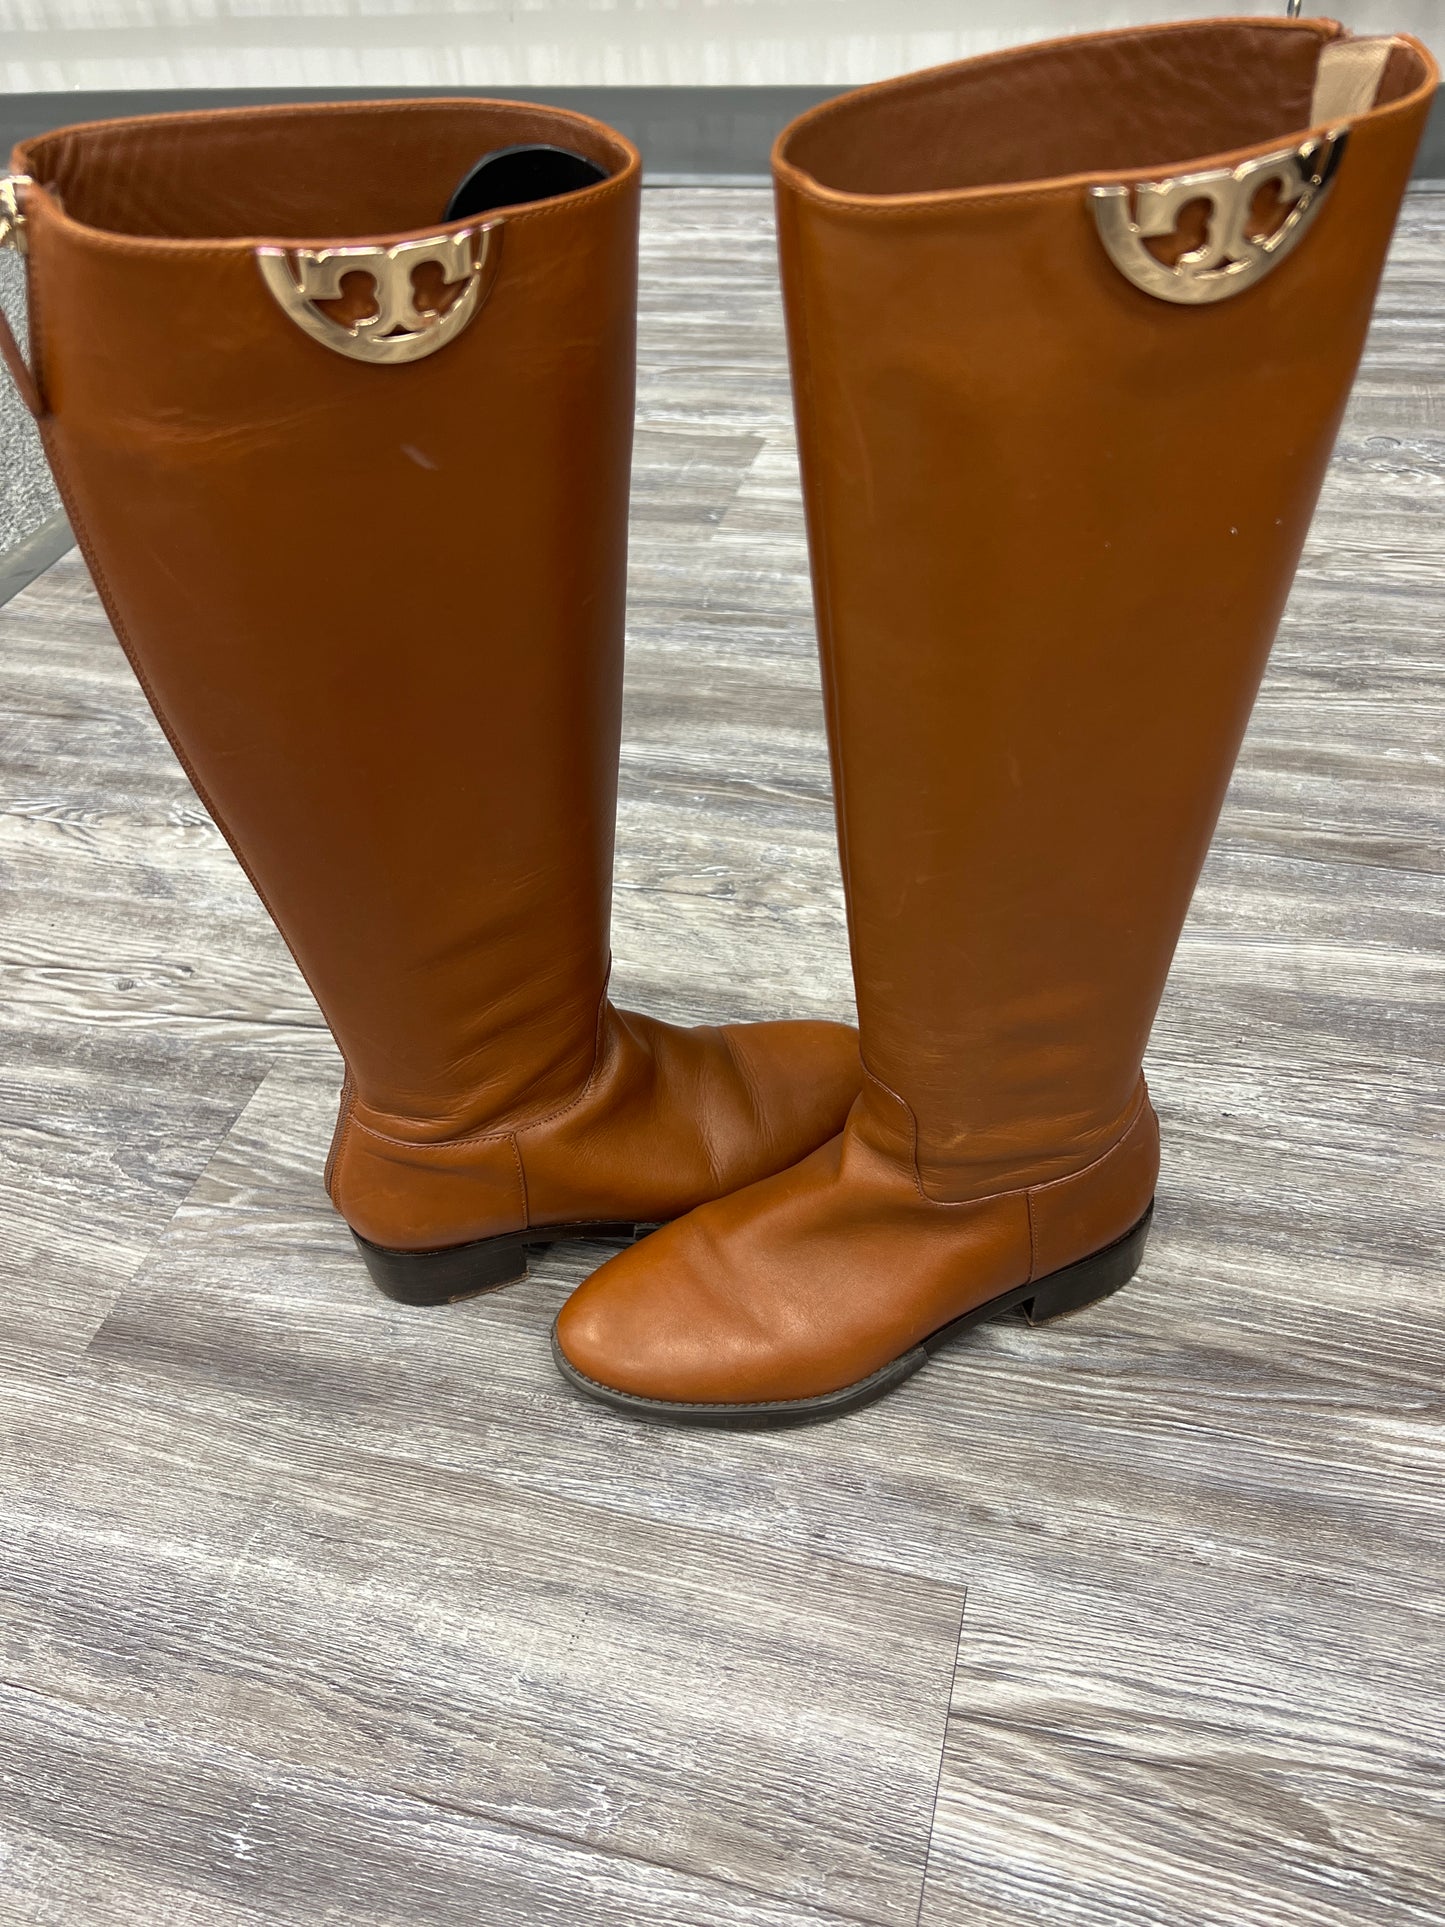 Boots Designer By Tory Burch Size: 5